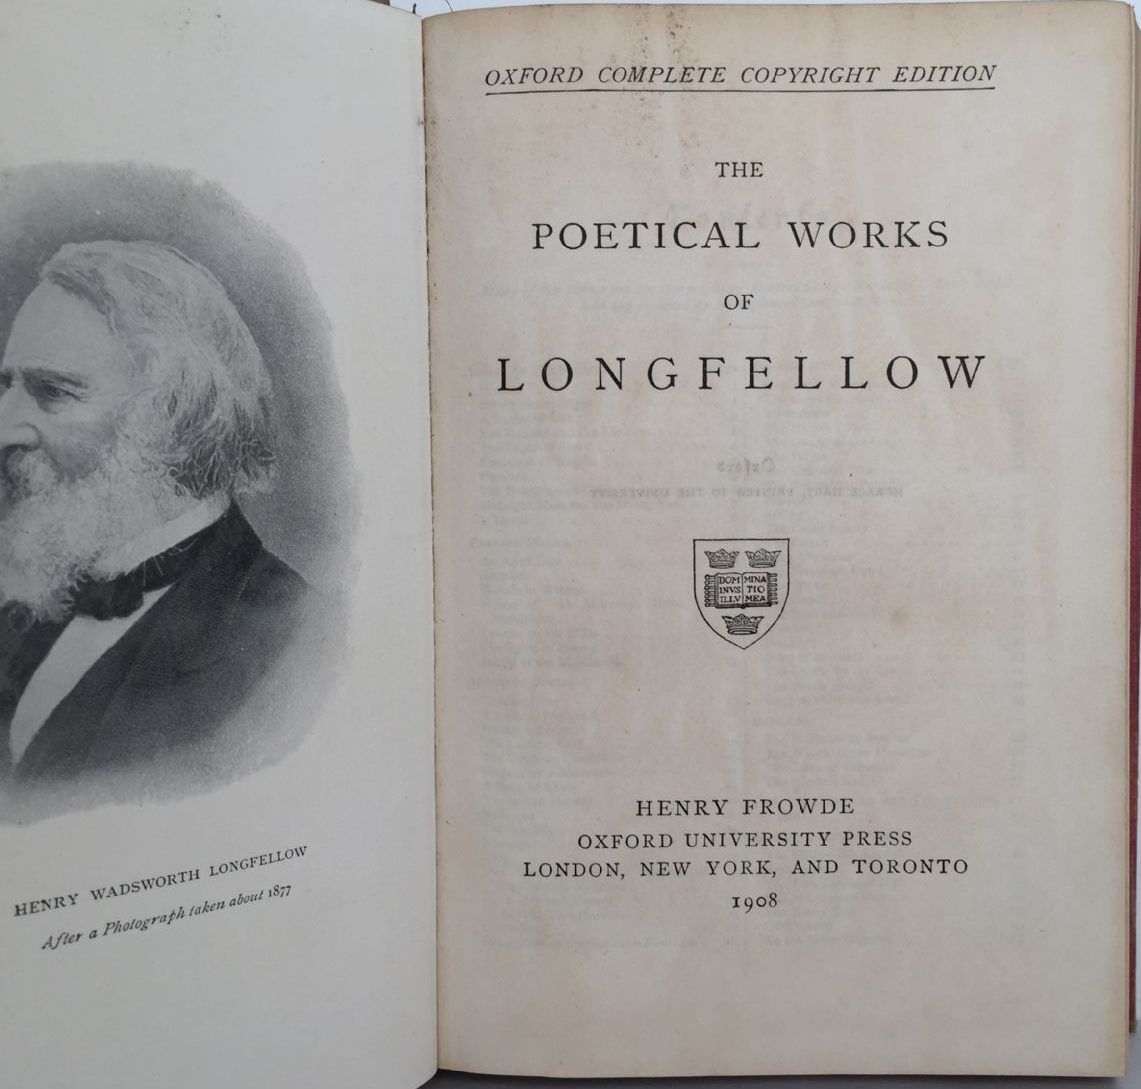 THE POETICAL WORKS OF LONGFELLOW